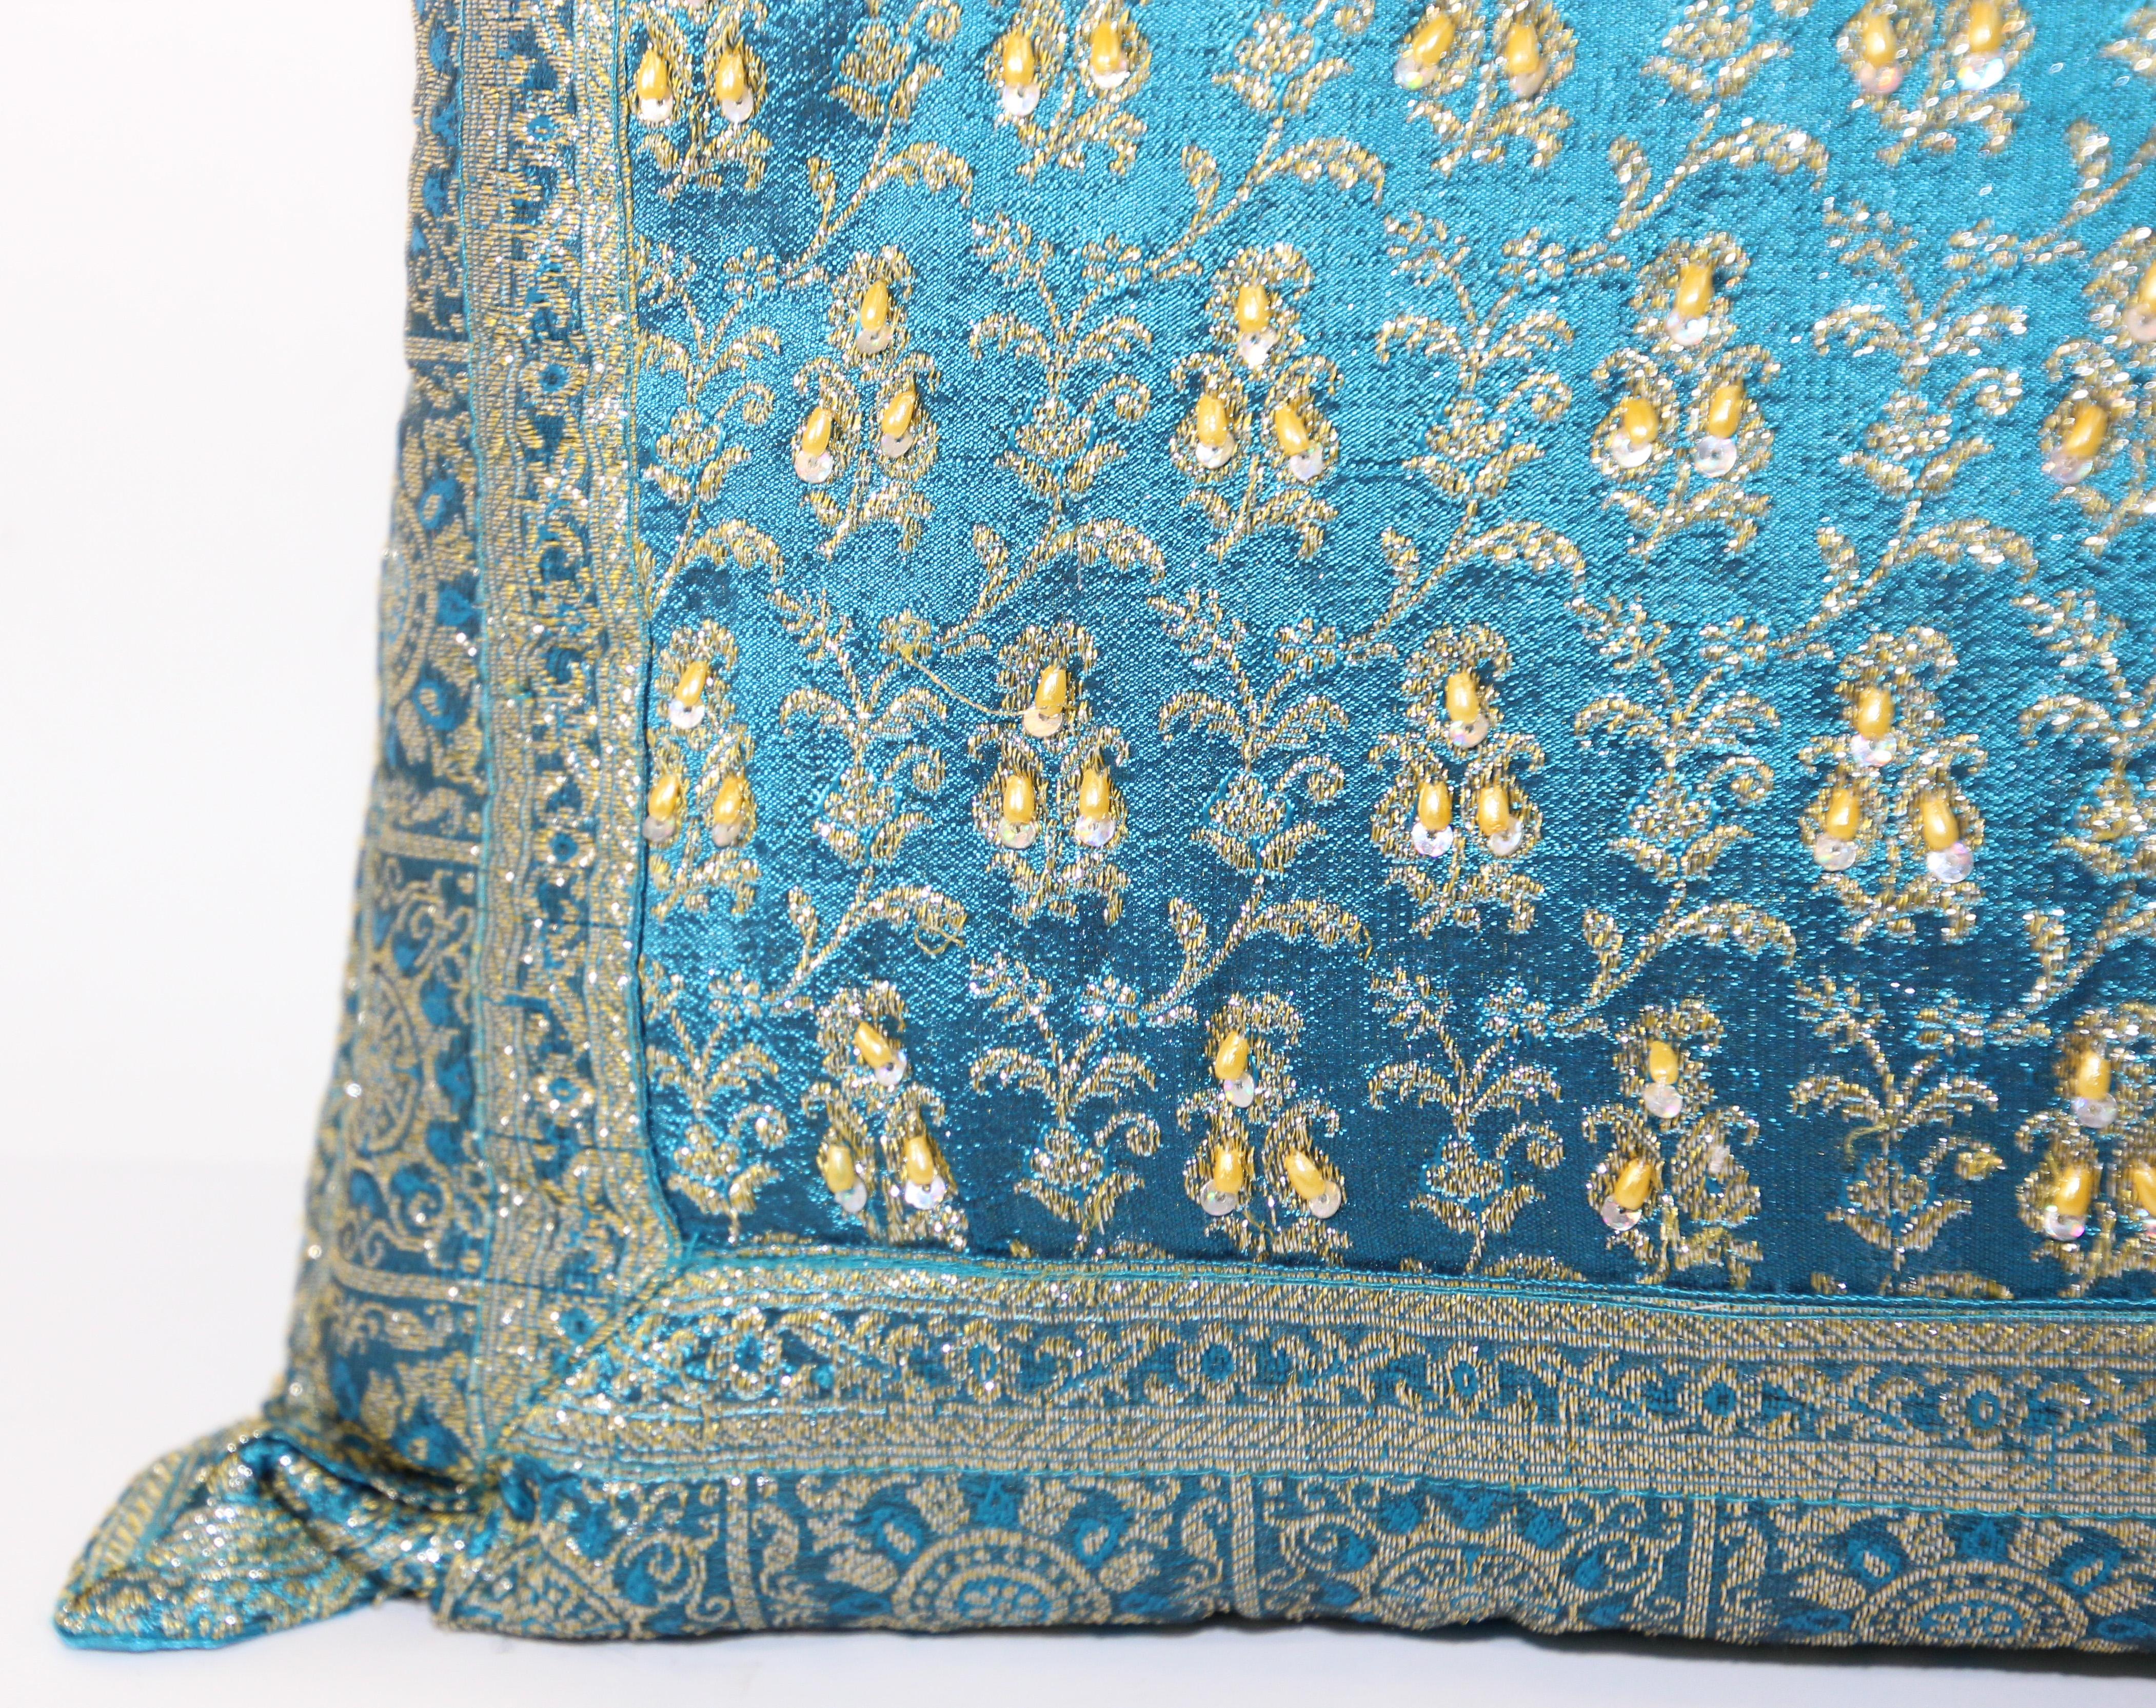 Turquoise Mughal Style Decorative Throw Pillow Embellished with Sequins and Bead In Good Condition For Sale In North Hollywood, CA